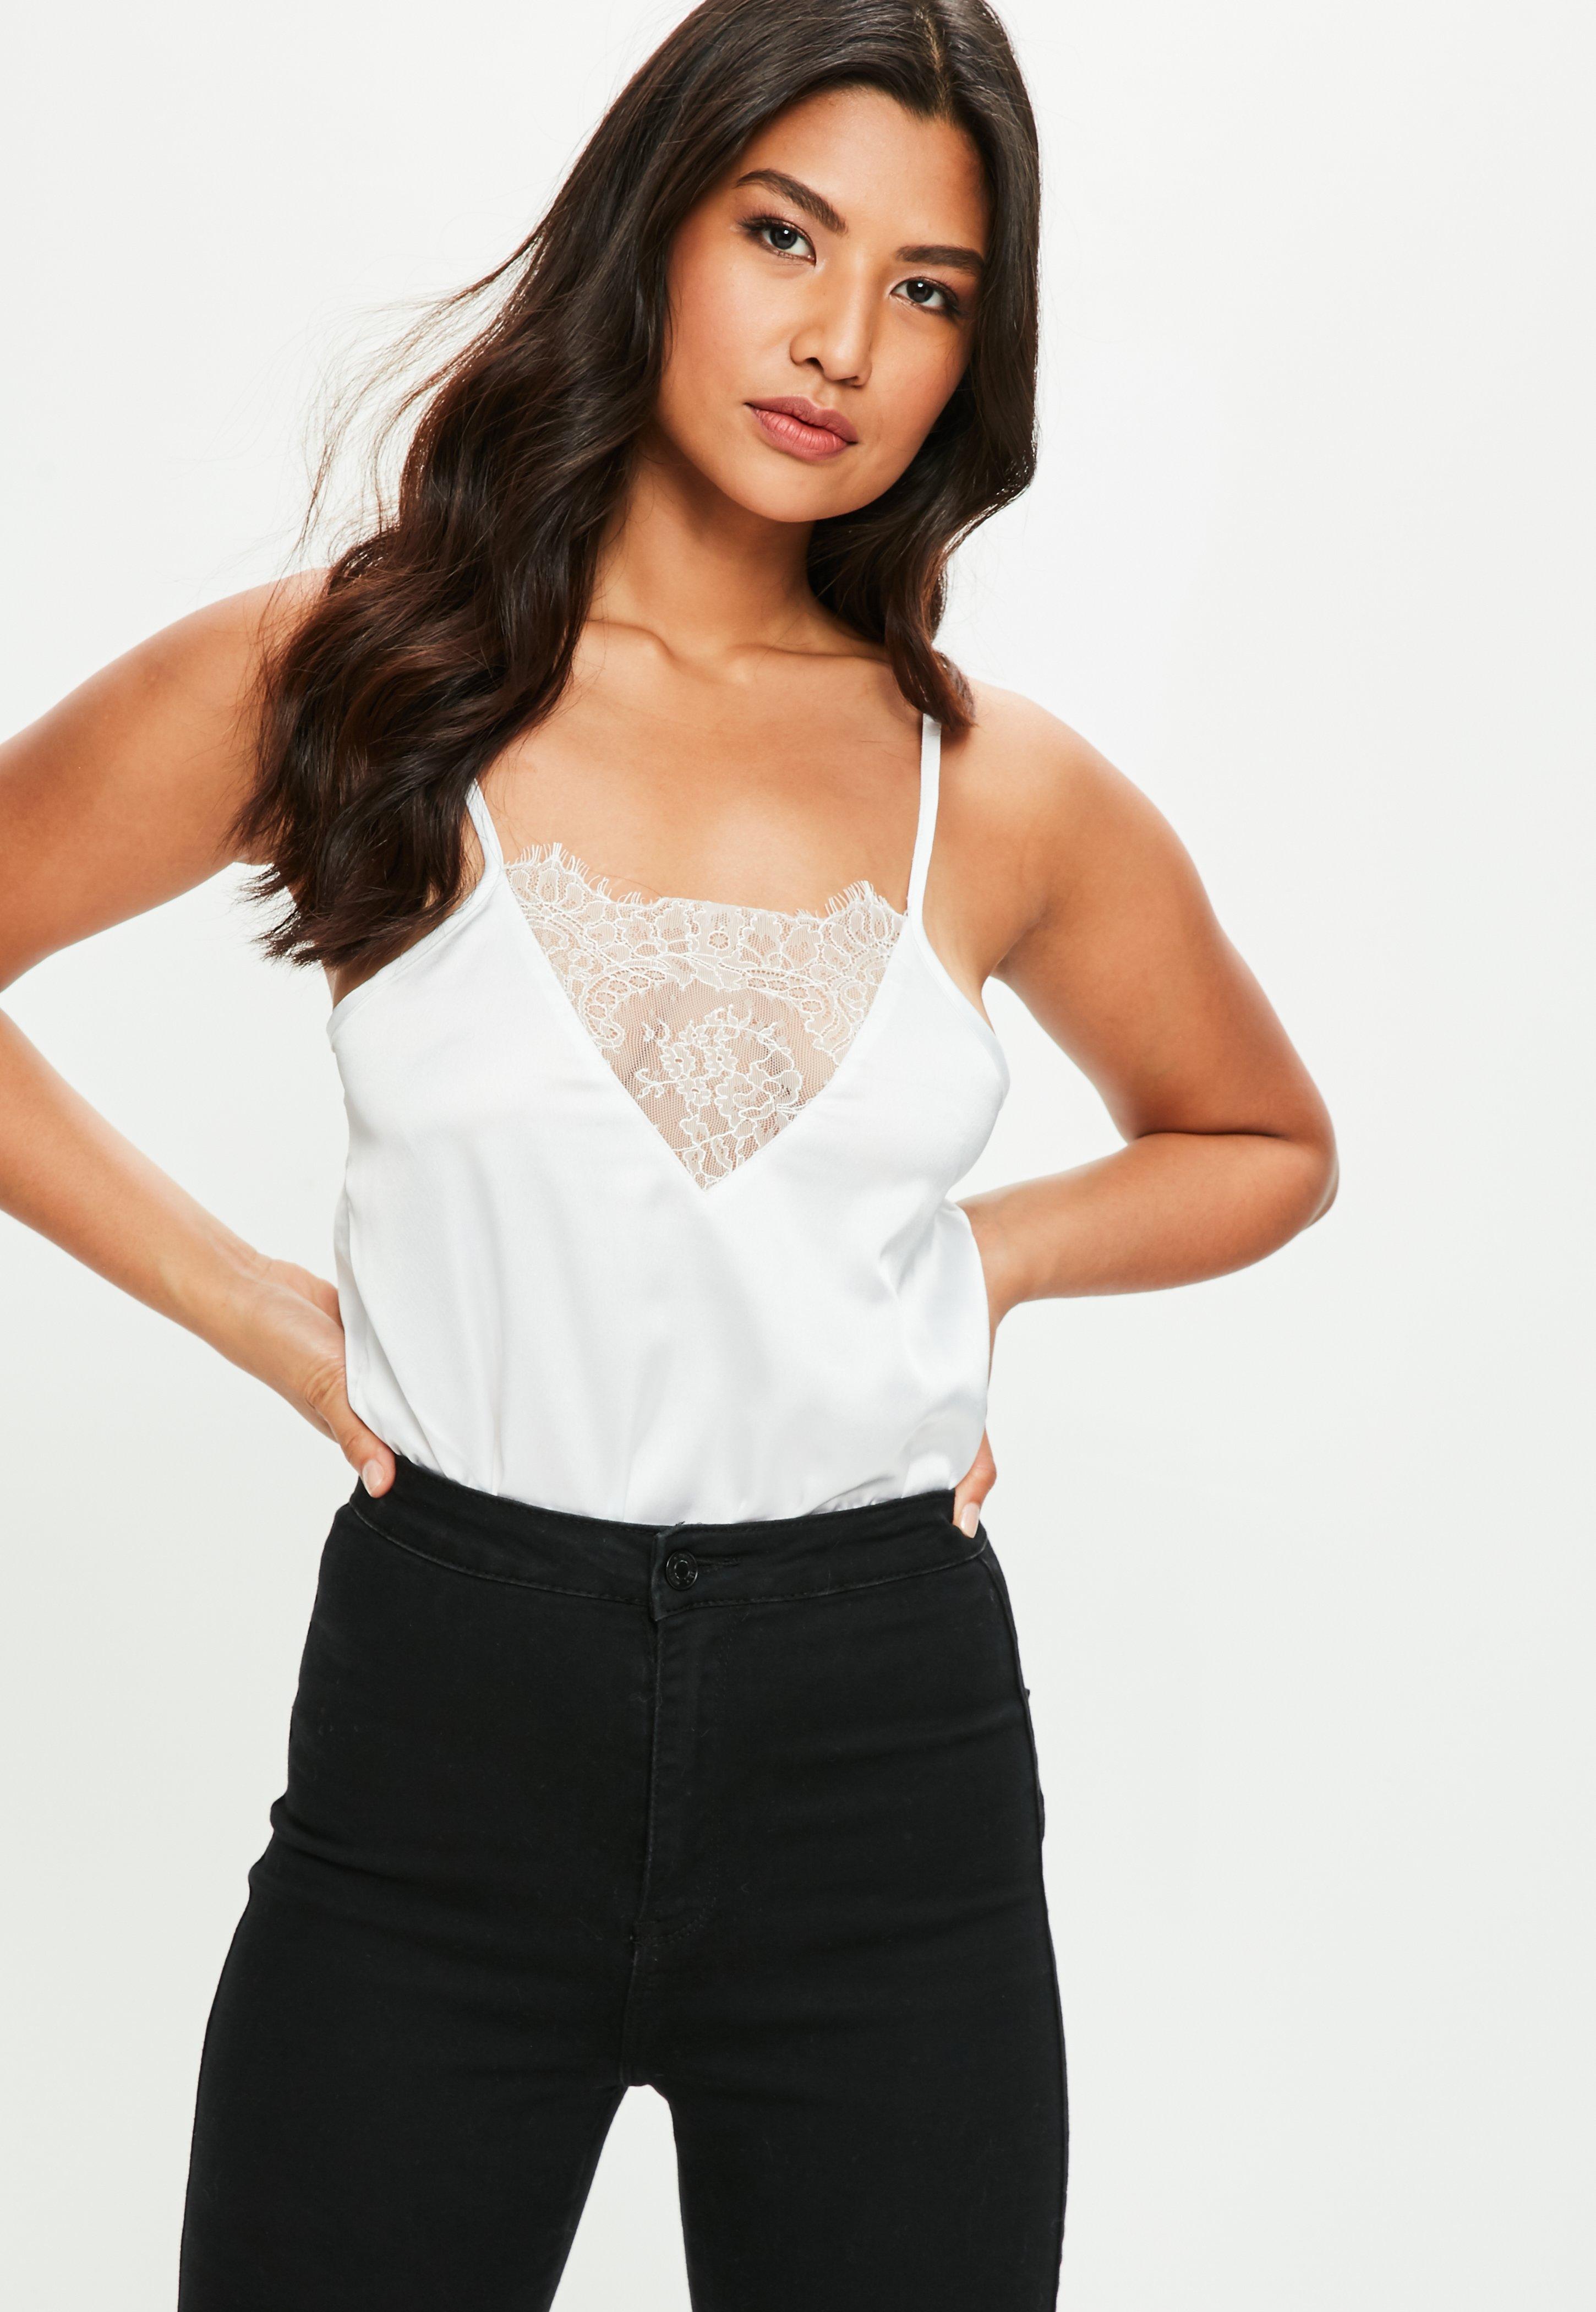 Lyst - Missguided White Lace Insert Bodysuit in White